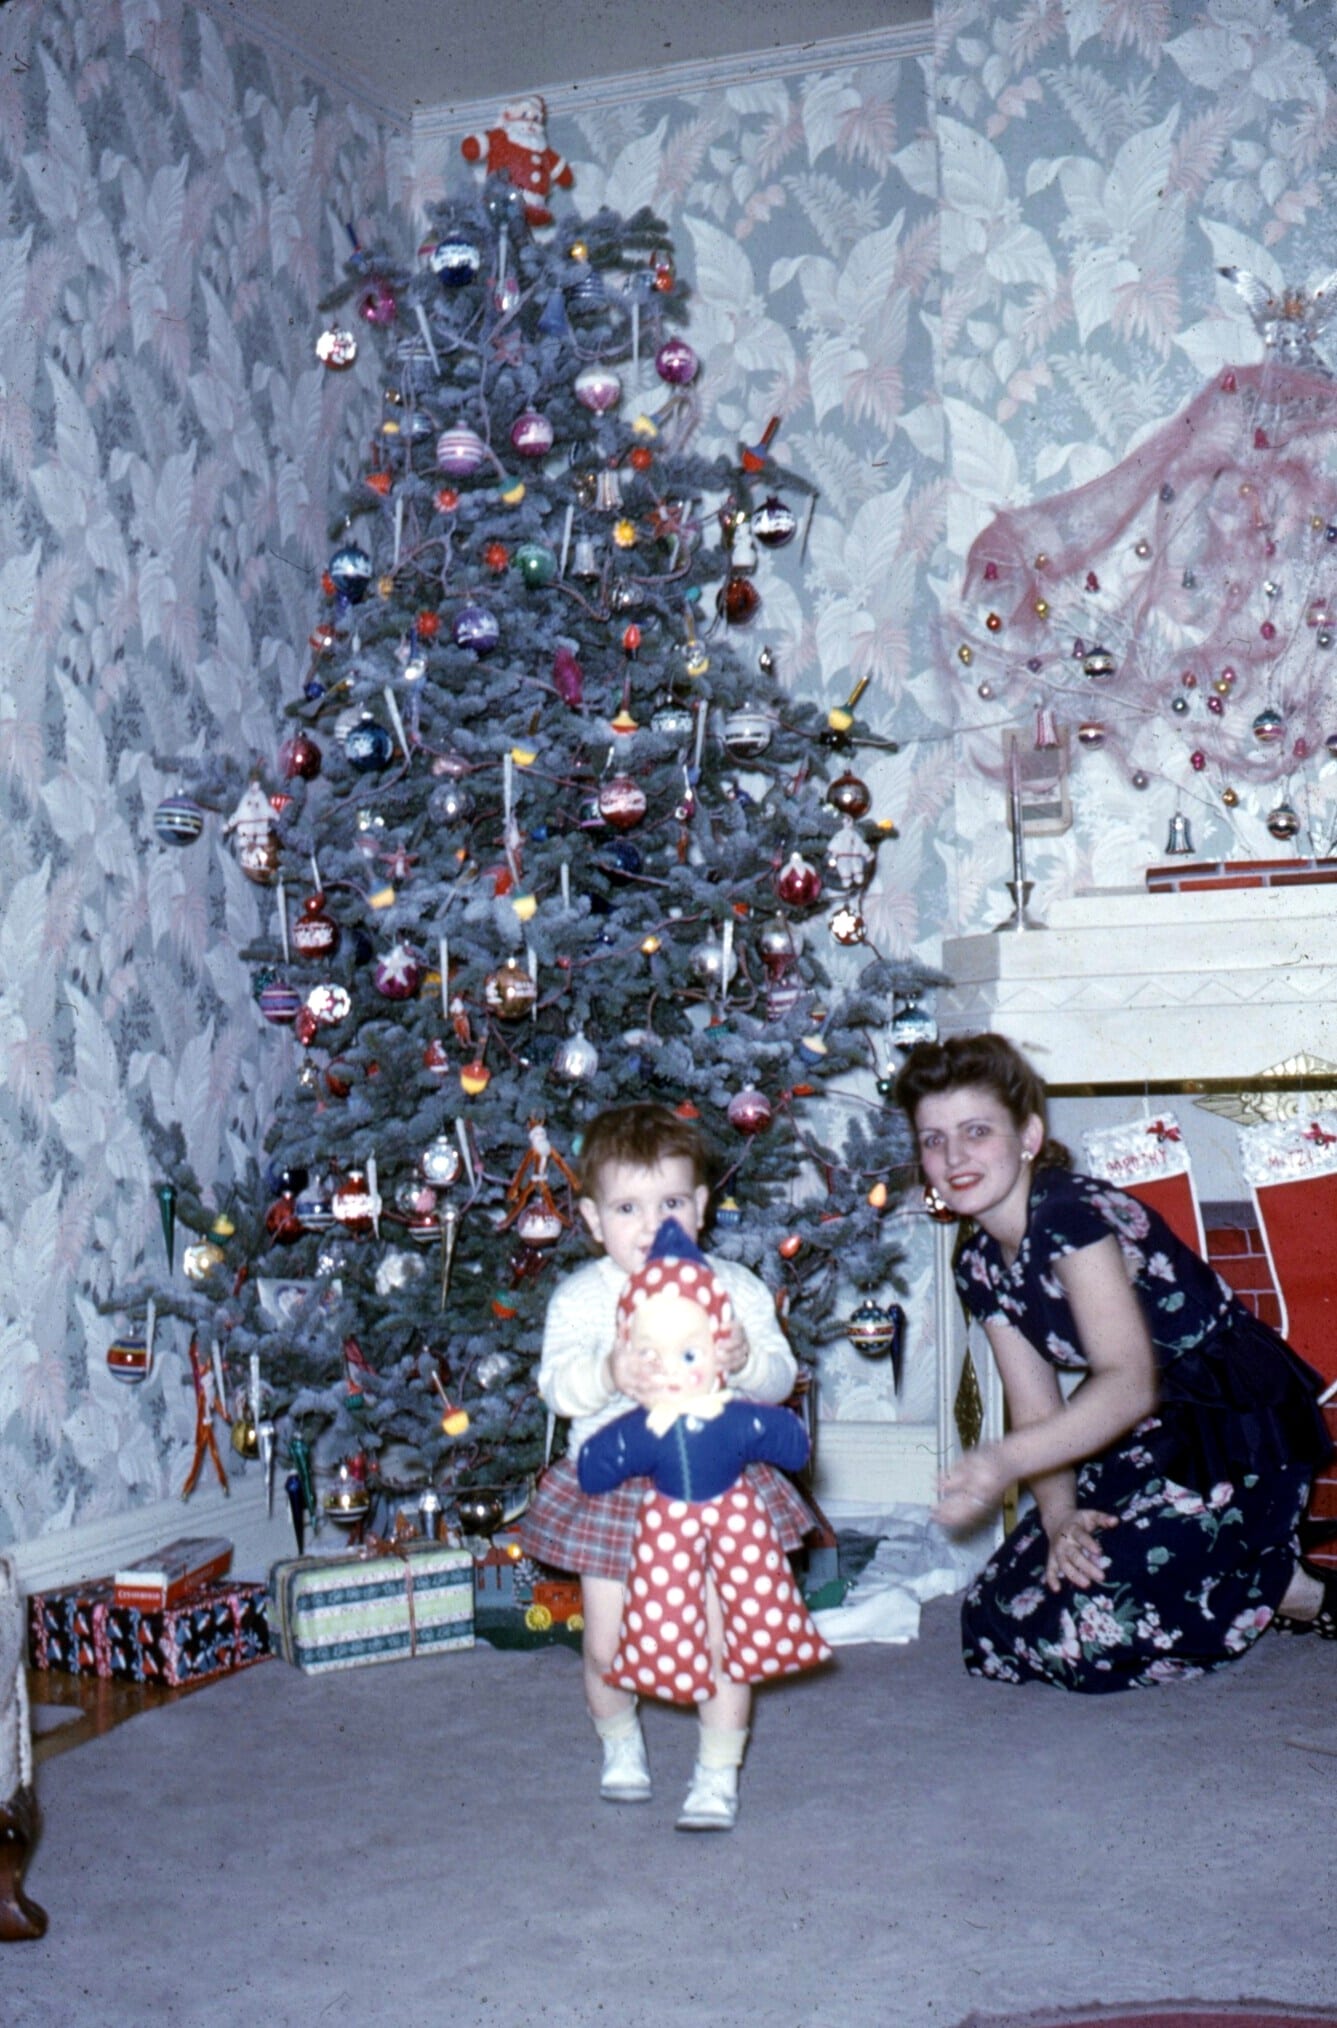 We Wish You a Vintage Christmas - Our favorite holiday photos!